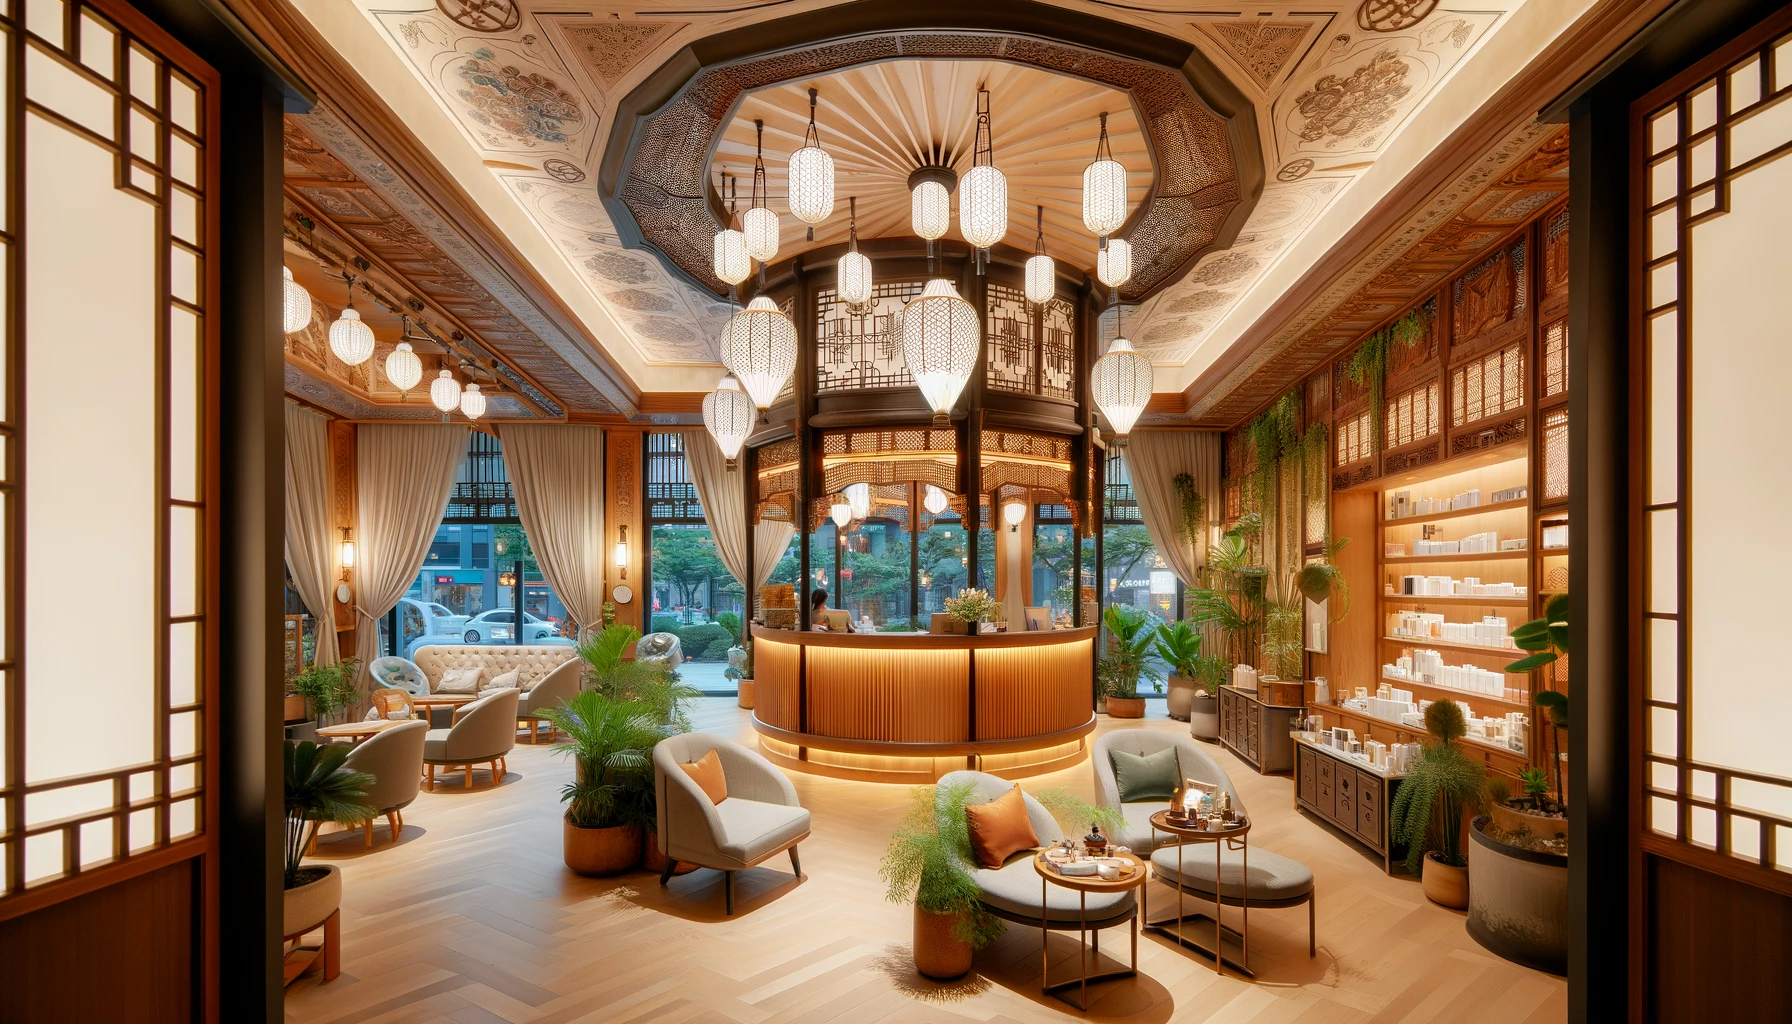 The image depicts a luxurious and elegant Korean beauty salon in Seoul. The interior design seamlessly blends traditional Korean elements with modern touches. Intricate woodwork and elegant paper lanterns hang from the ceiling, adding a touch of cultural heritage. Lush green indoor plants are scattered throughout, creating a serene and inviting atmosphere. The salon is spacious, featuring comfortable seating areas and a reception desk adorned with Korean-style decor. Shelves displaying a variety of high-end beauty products are visible. Large windows allow natural light to flood the space, enhancing the warm and welcoming ambiance of the salon. The overall look and feel of the salon combine contemporary and classic Korean beauty techniques in a harmonious and aesthetically pleasing manner.